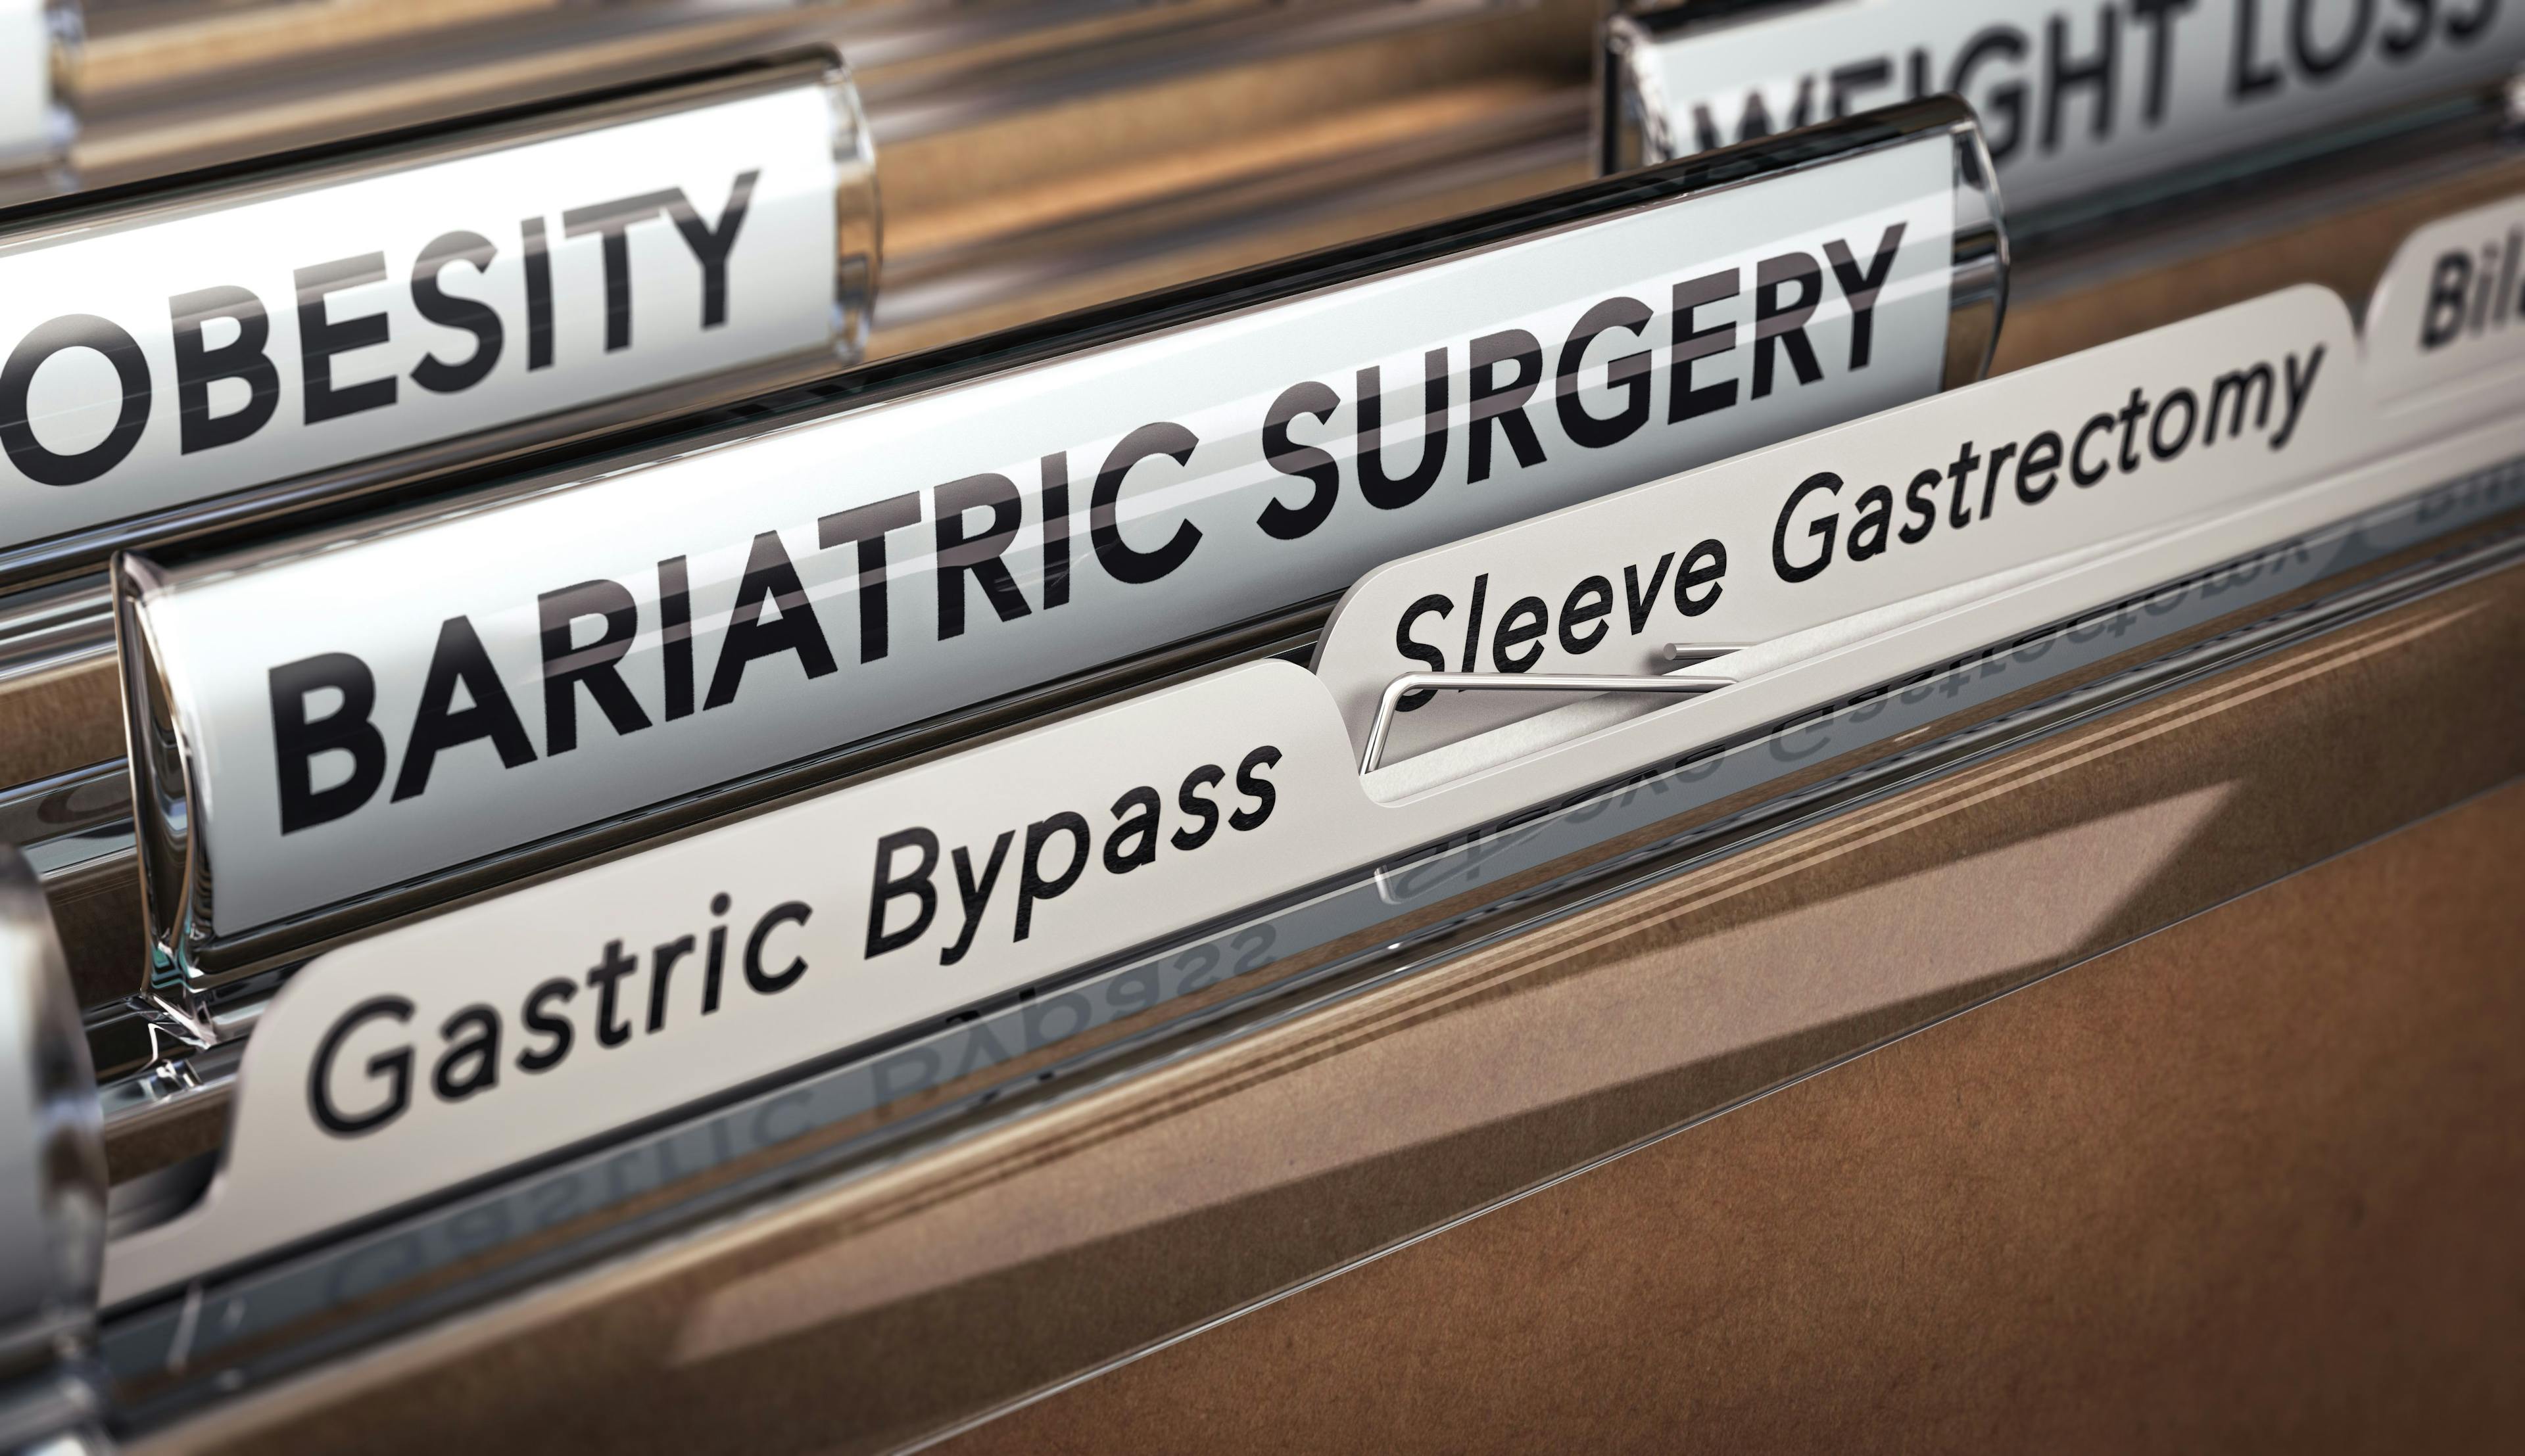 Bariatric surgery | Image credit: Olivier Le Moal – stock.adobe.com